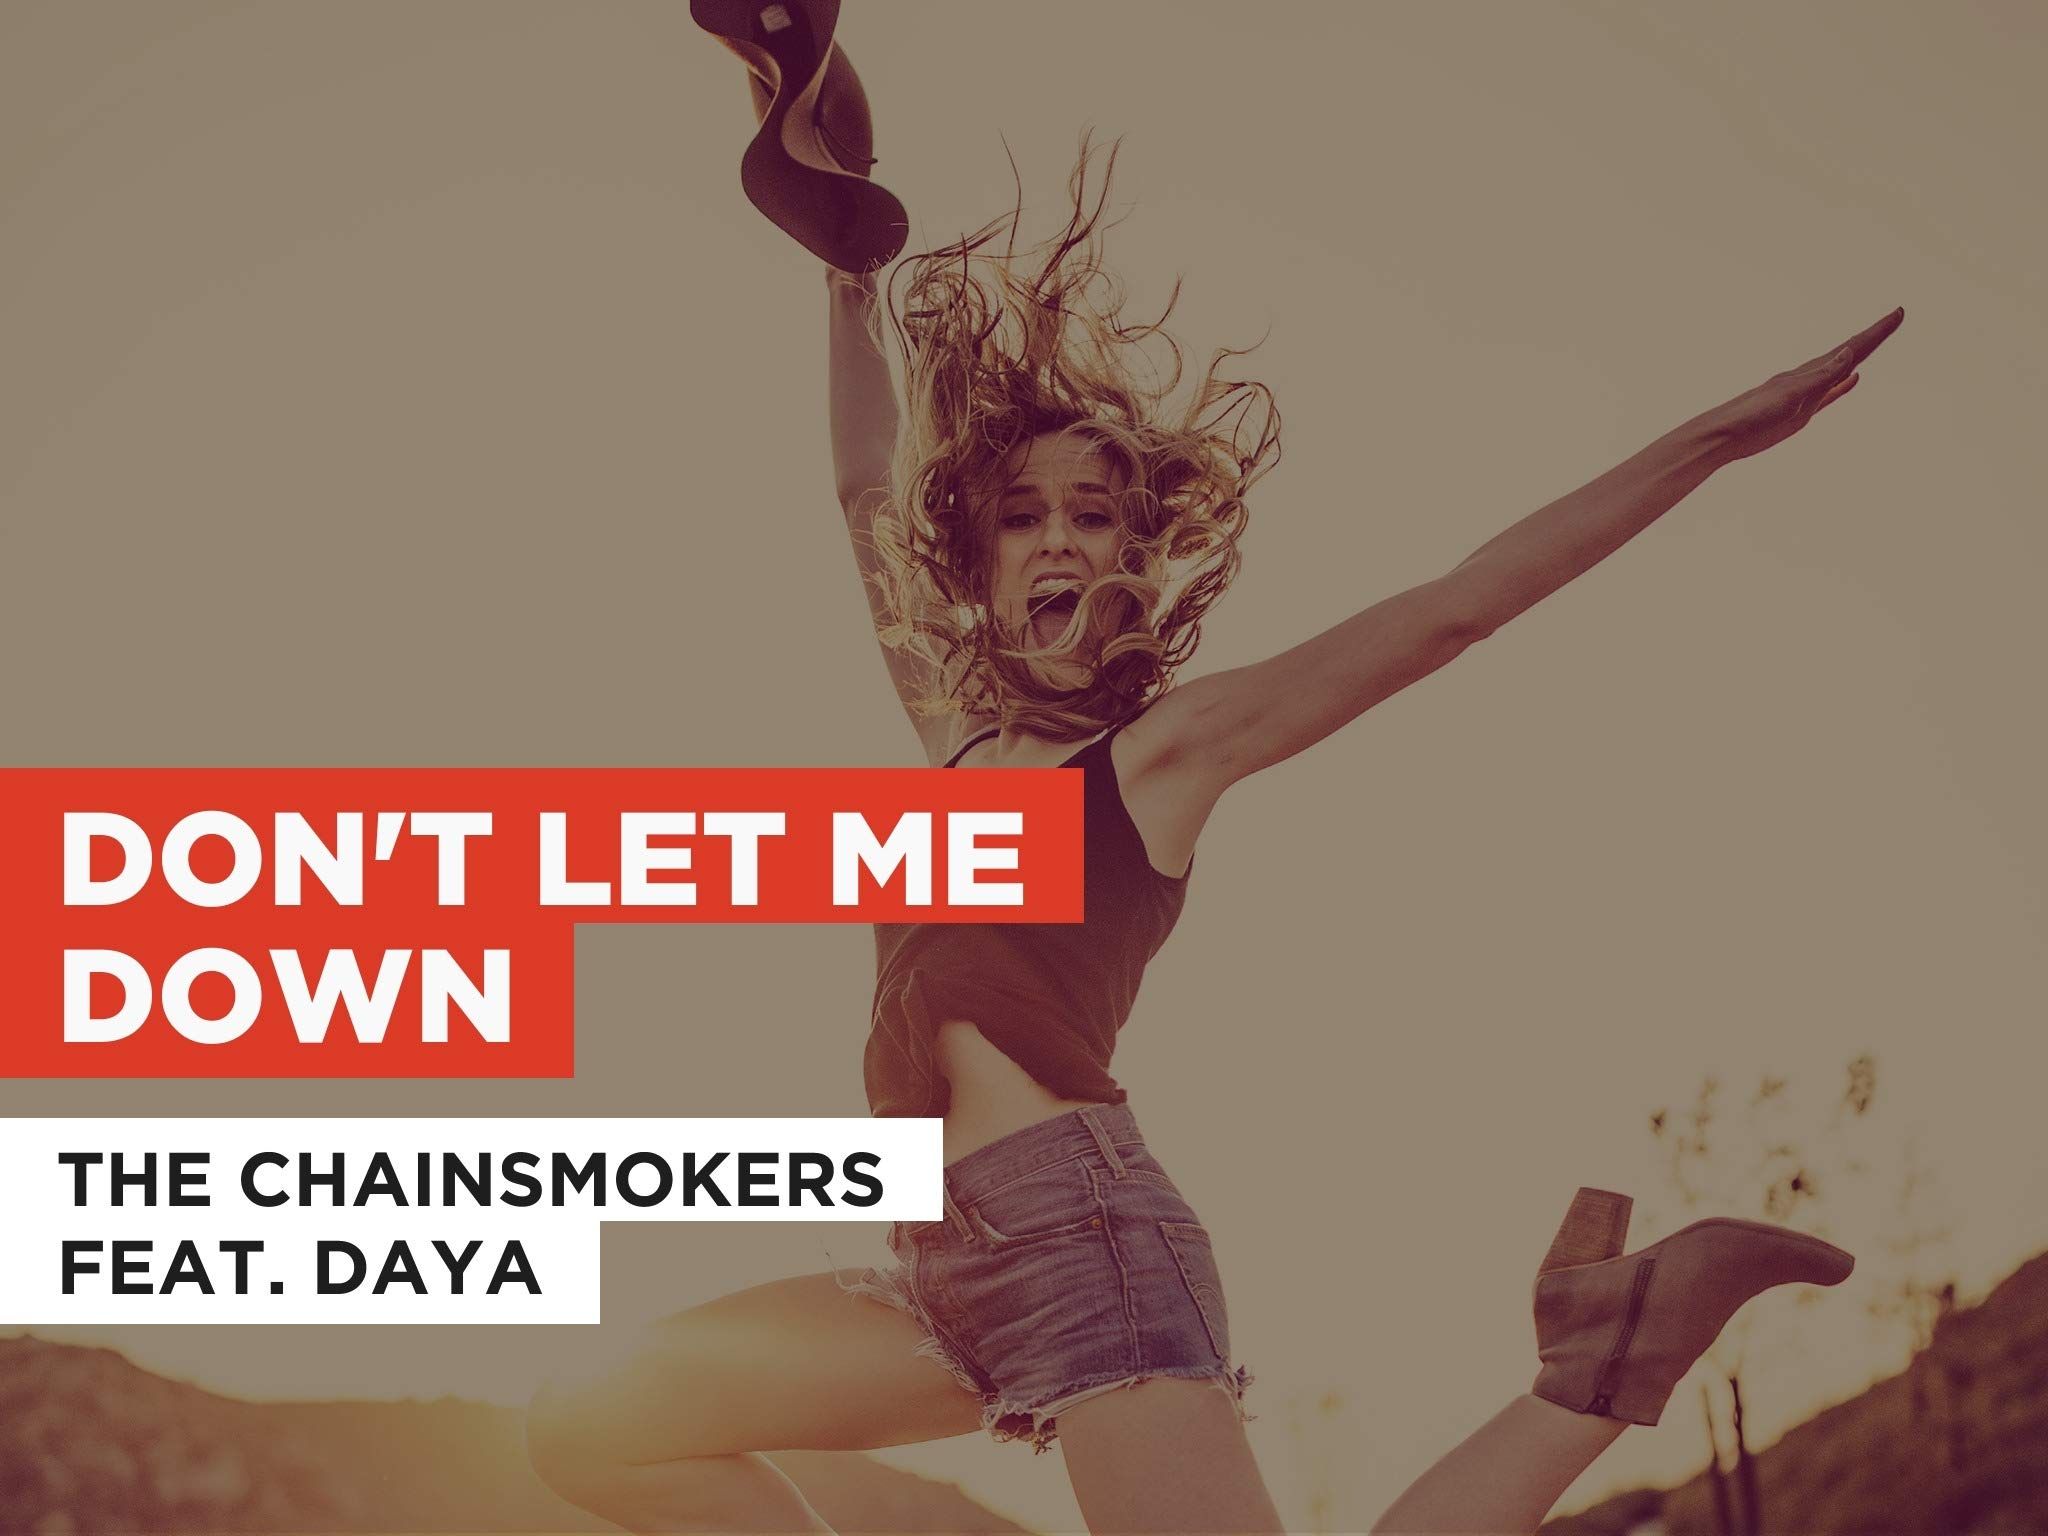 Watch Don't Let Me Down in the Style of The Chainsmokers feat. Daya